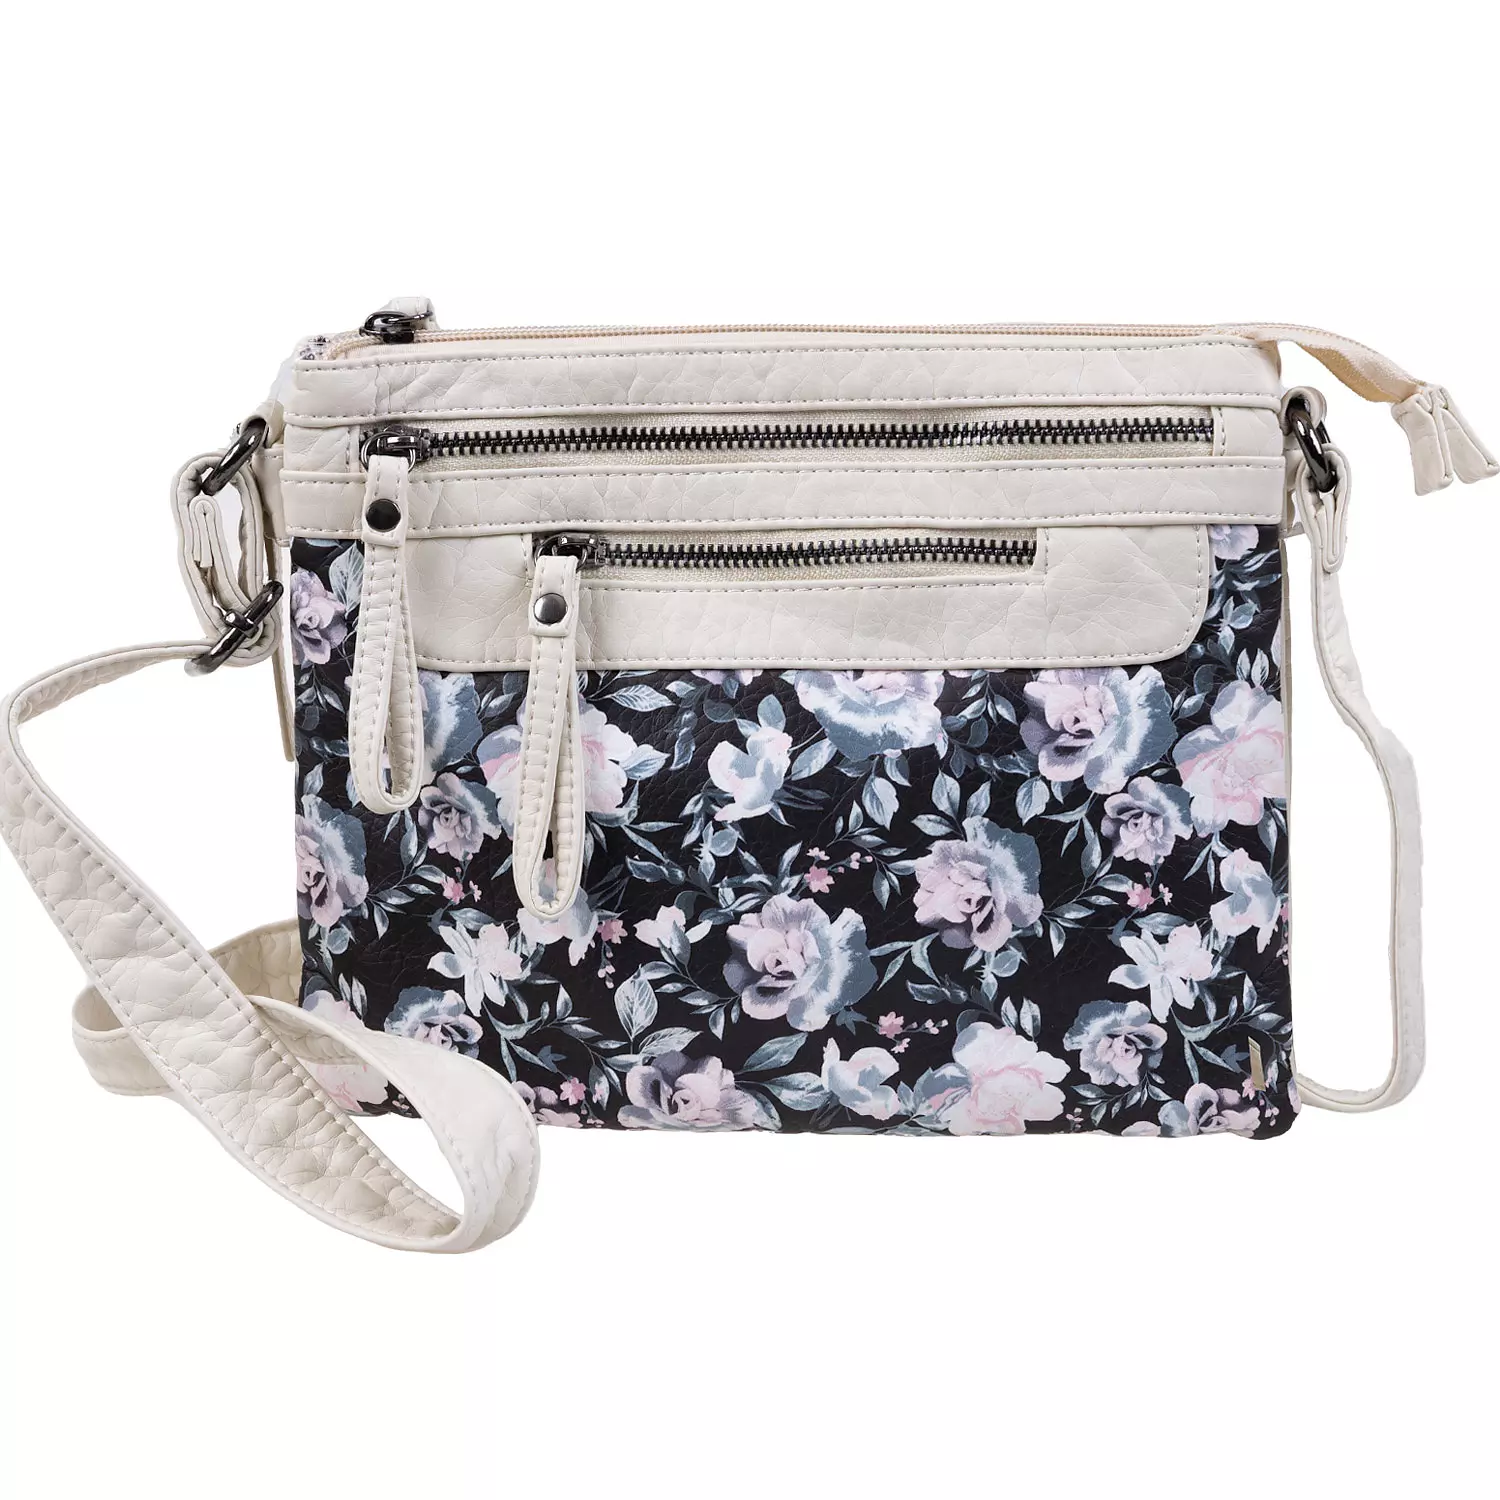 Women's crossbody bag, ivory with floral print